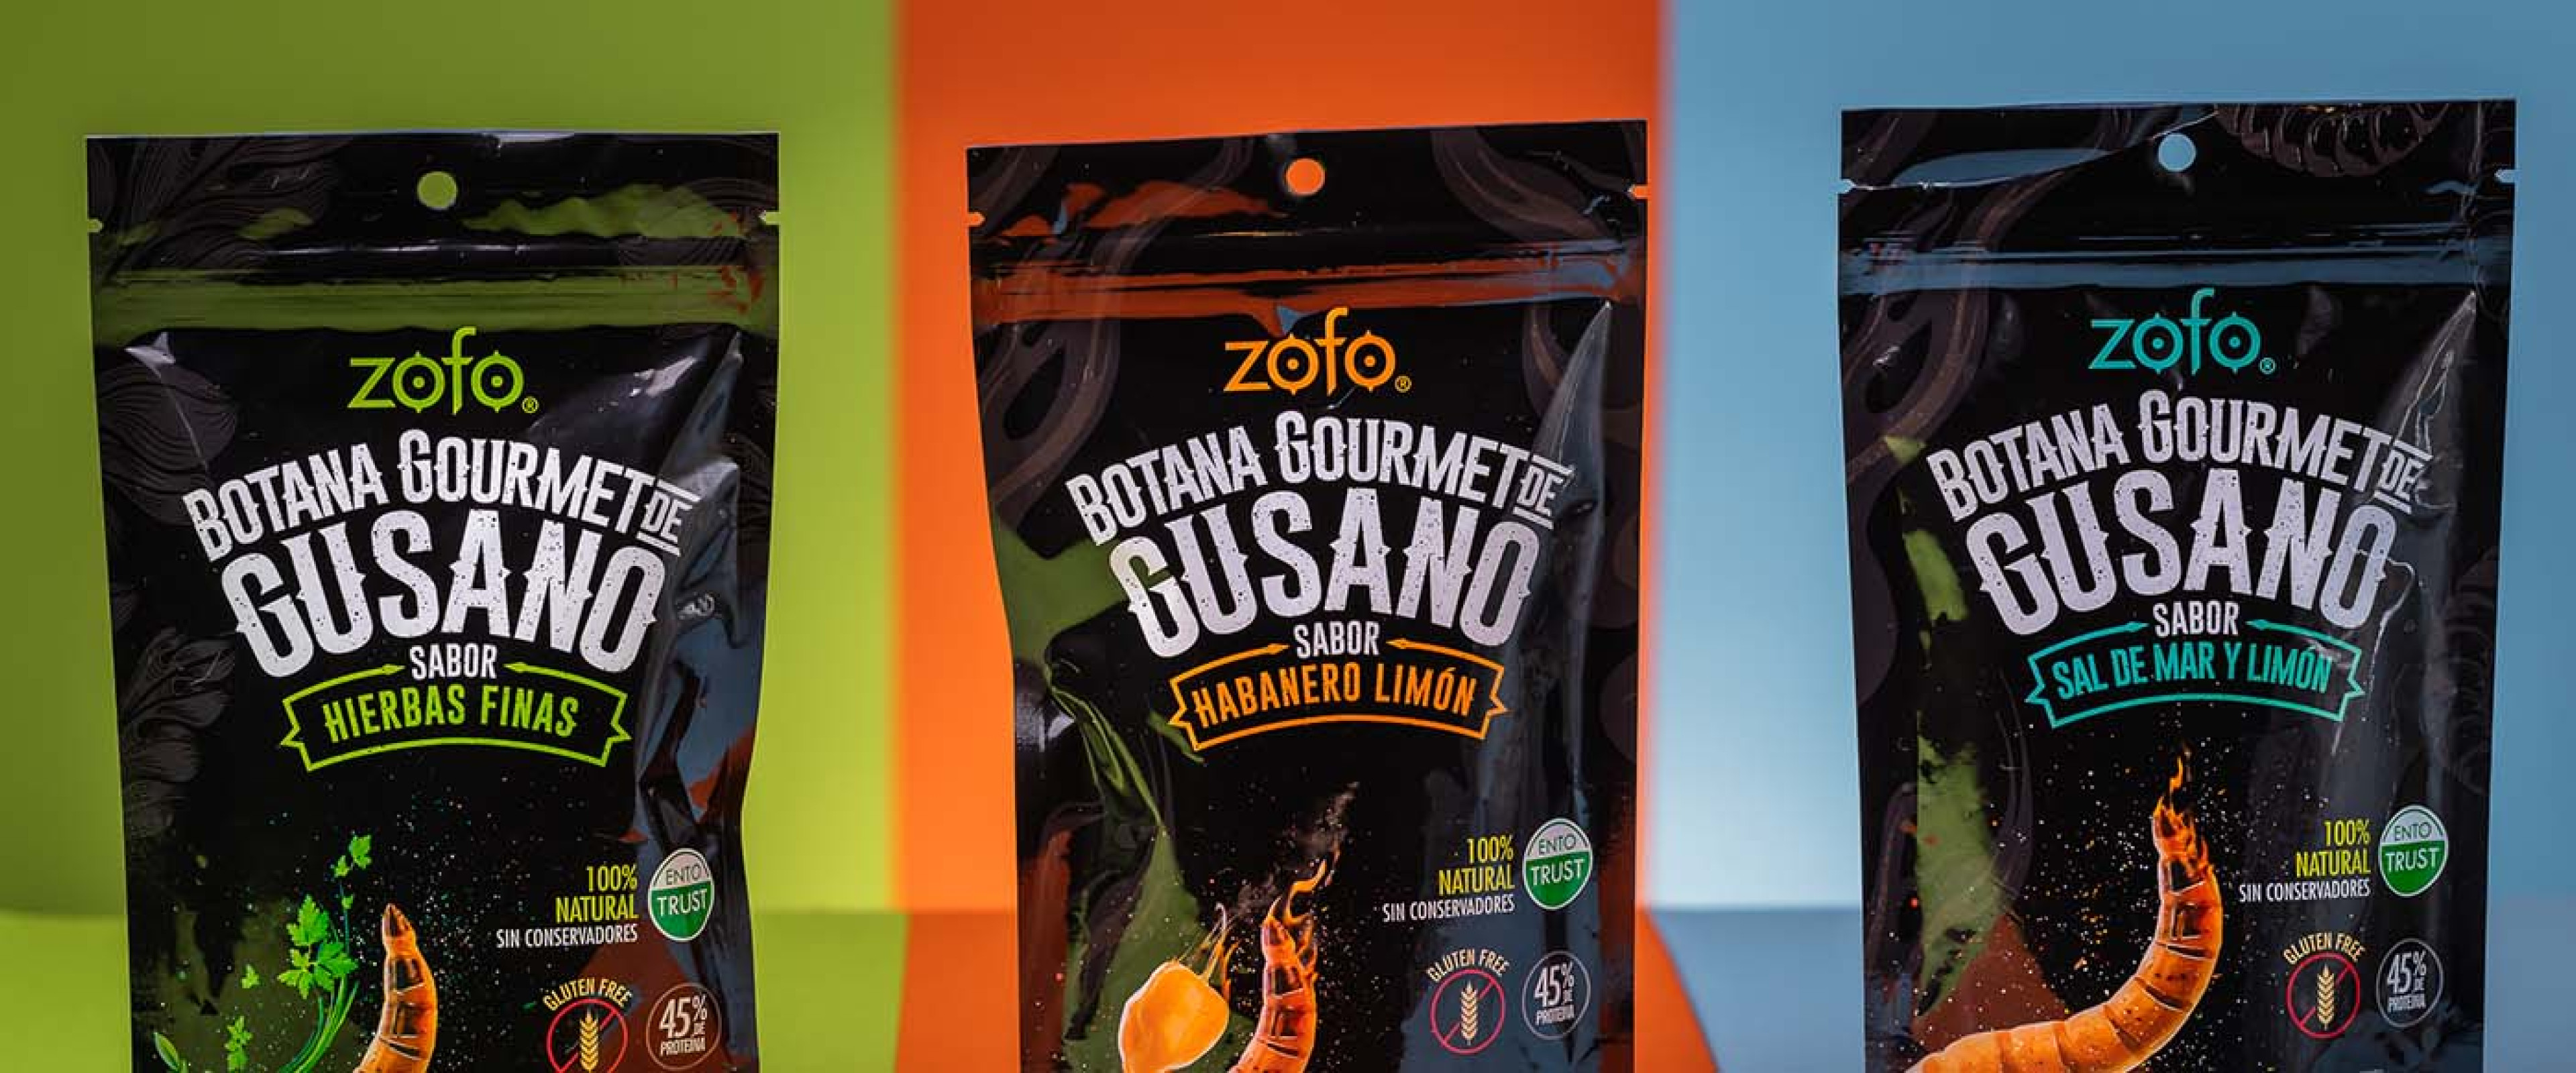 ZOFO, alternate protein snacks are displayed in three different flavors behind green, orange and blue backgrounds.